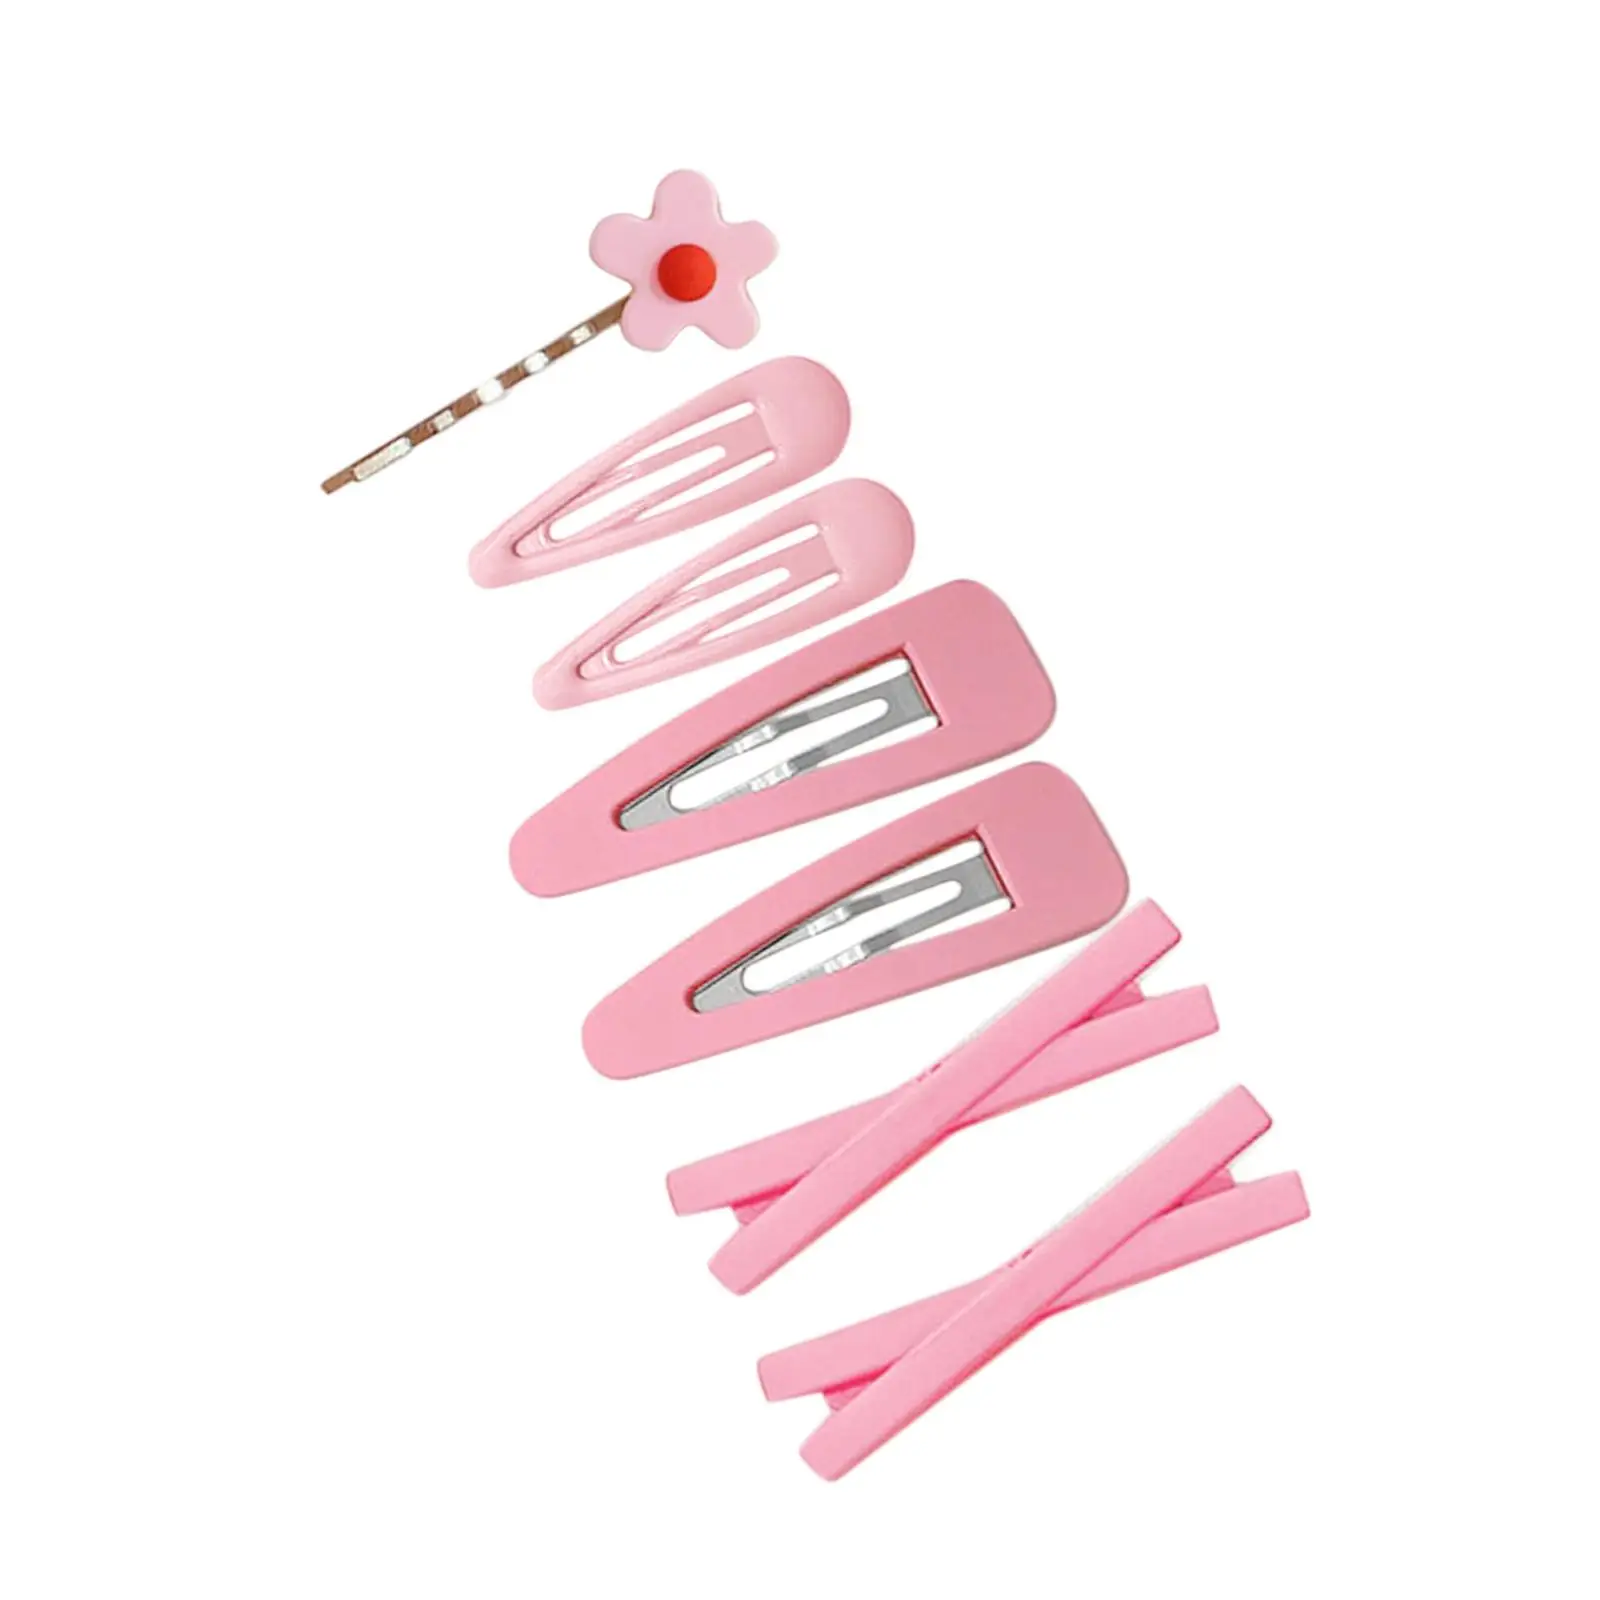 7x Girls Hair Clips Hairclips Hair Accessories Gift Snap Hairpins Resin Headwear for Women Lady Hairdressing Party Bangs Waves